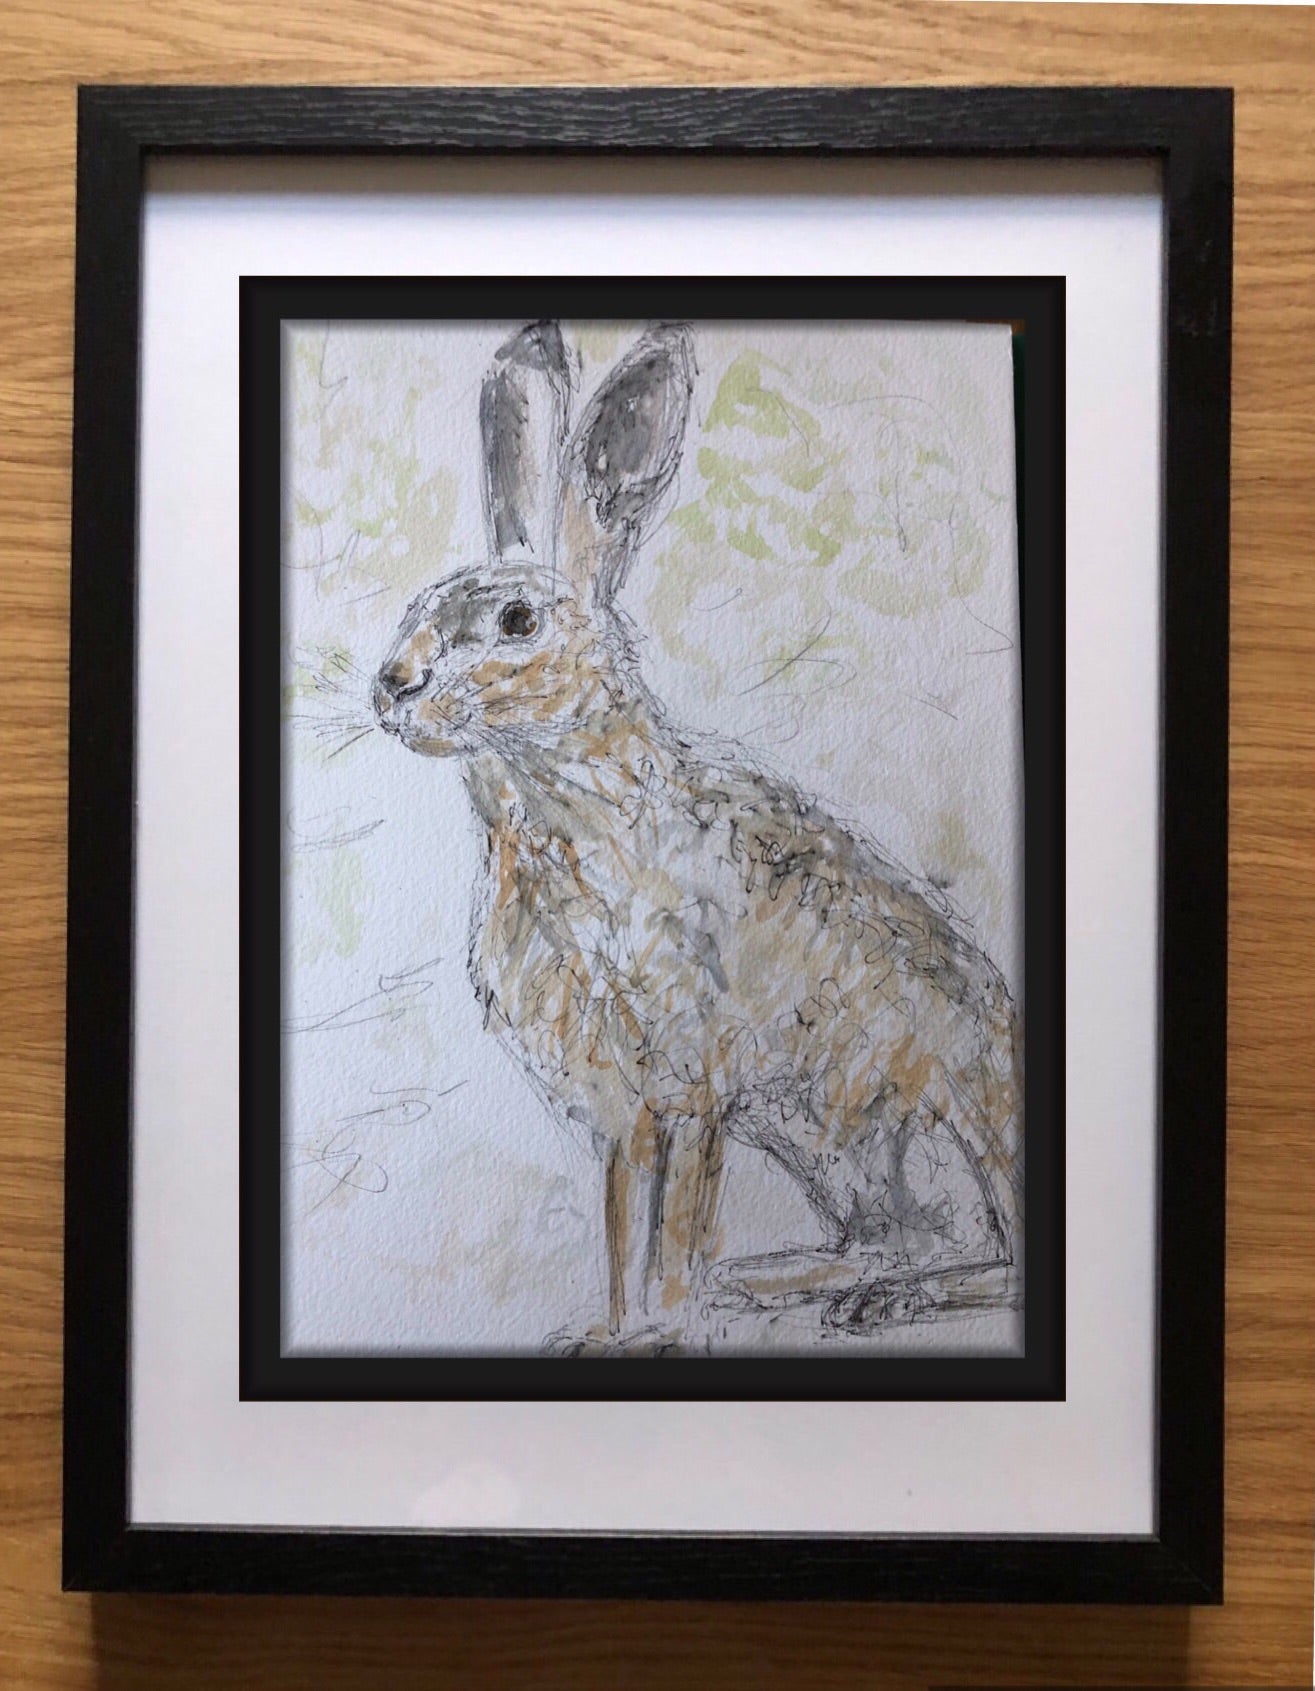 Hare in the wild - SOLD